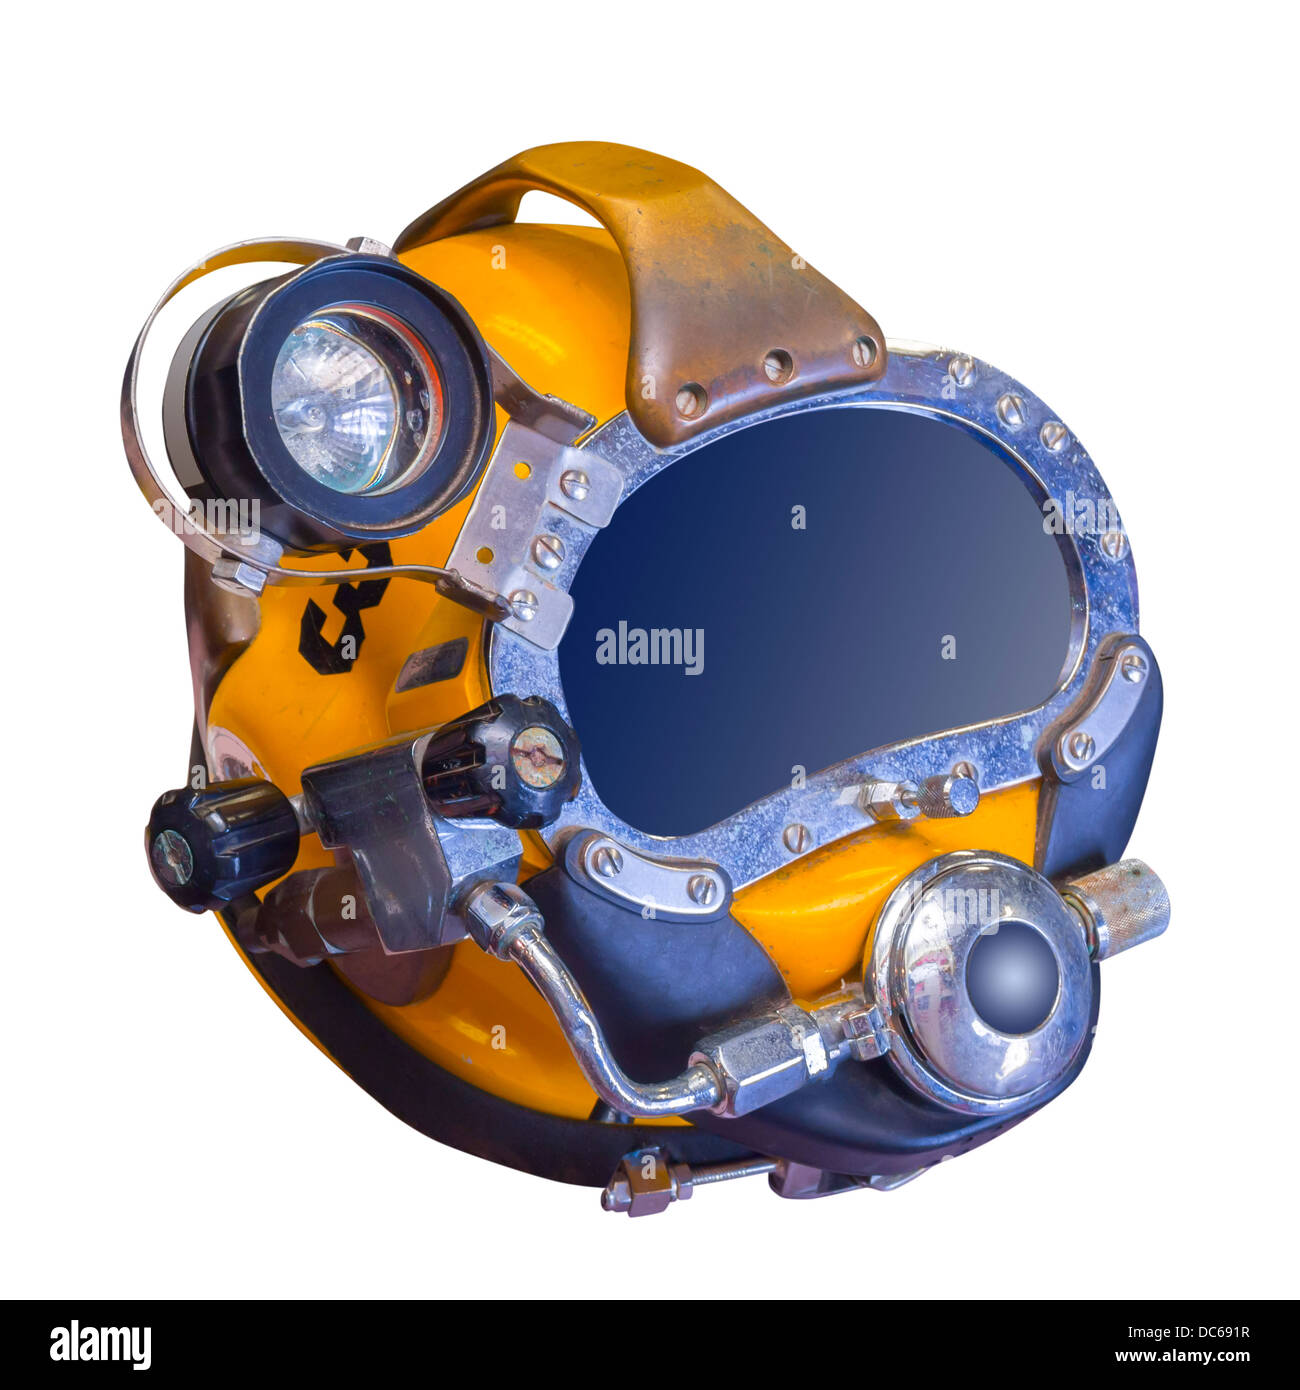 Modern deep sea diving helmet designed to go down to 1500 feet, isolated Stock Photo